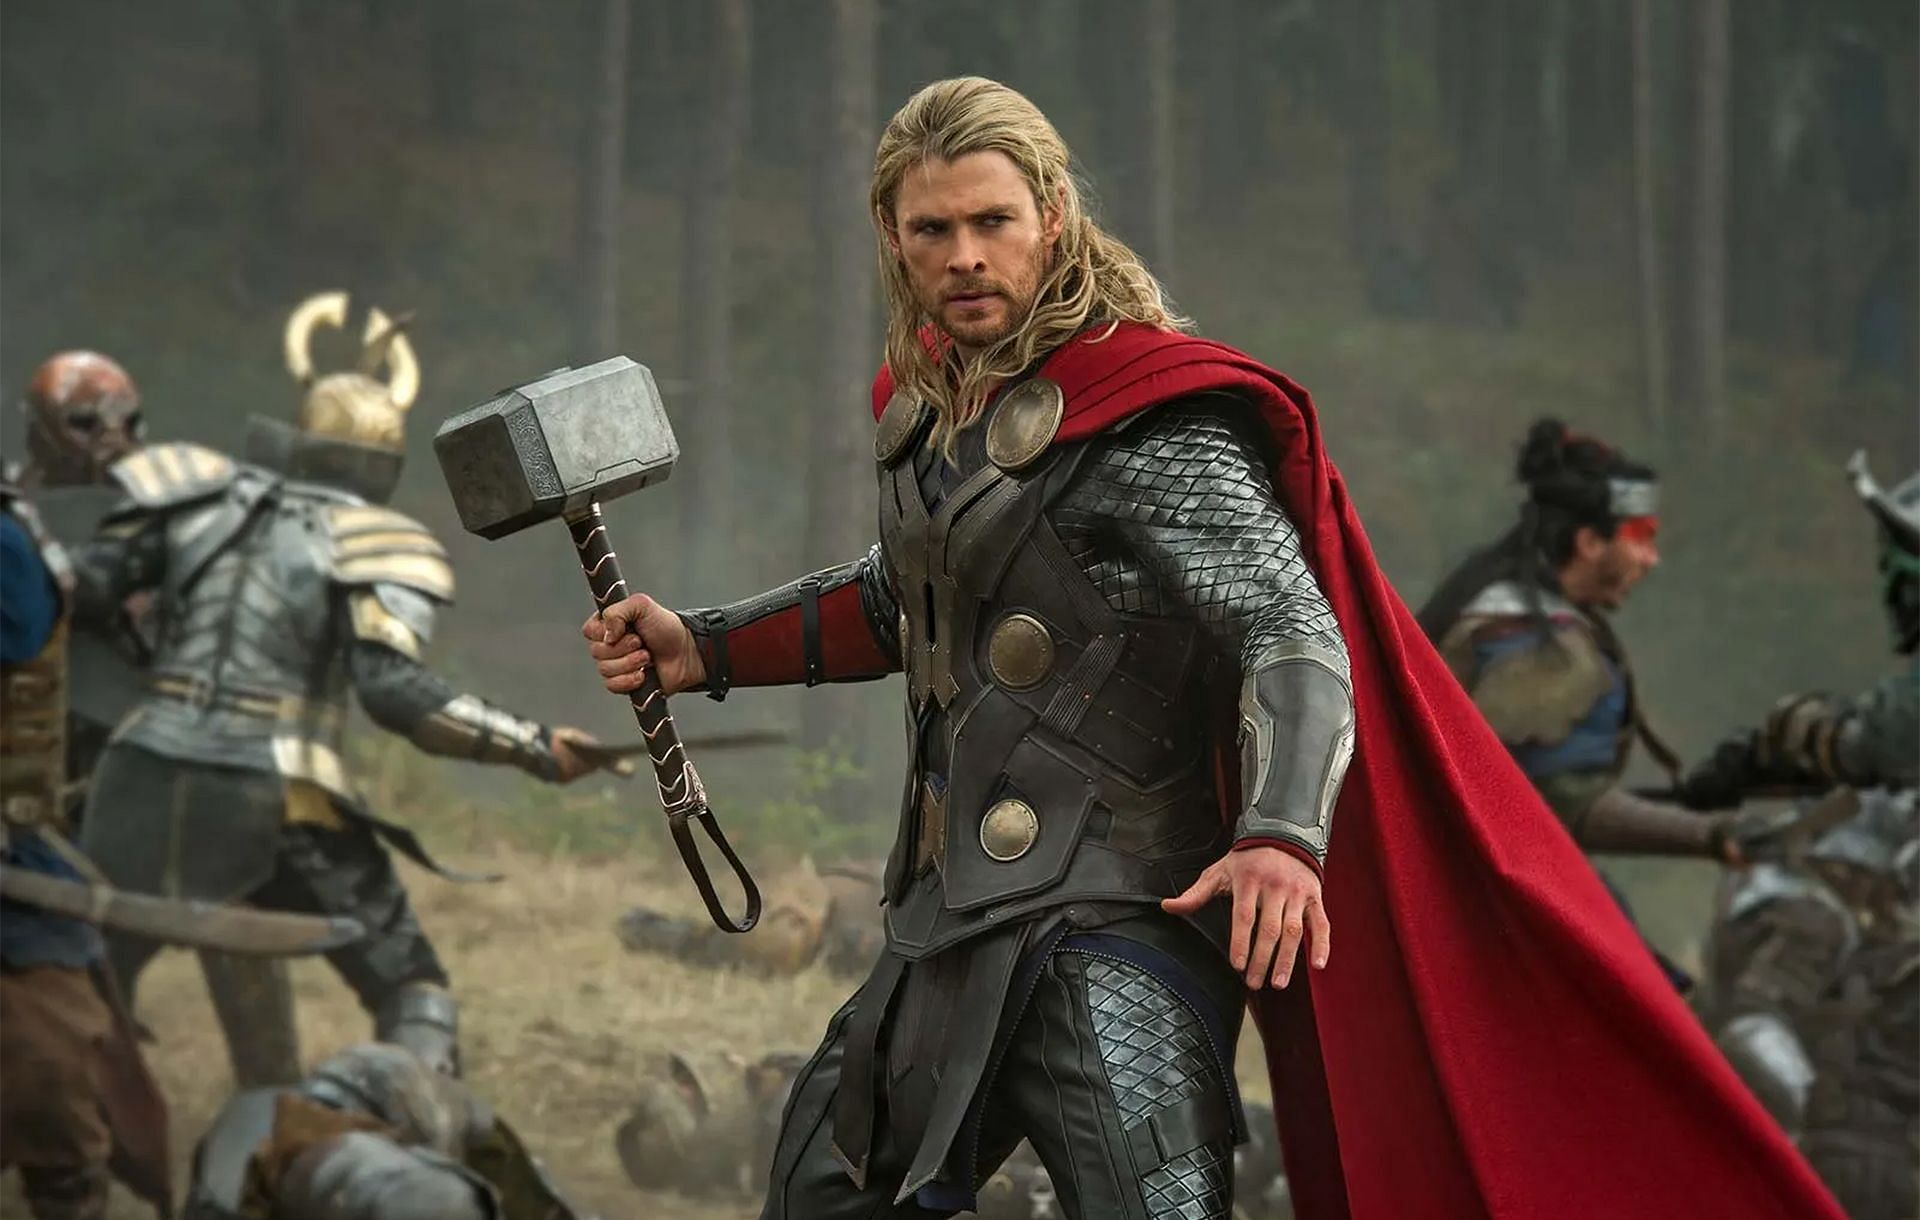 Thor is a god from the Asgardian pantheon and the renowned savior of Asgard and Earth. (Image via Marvel)